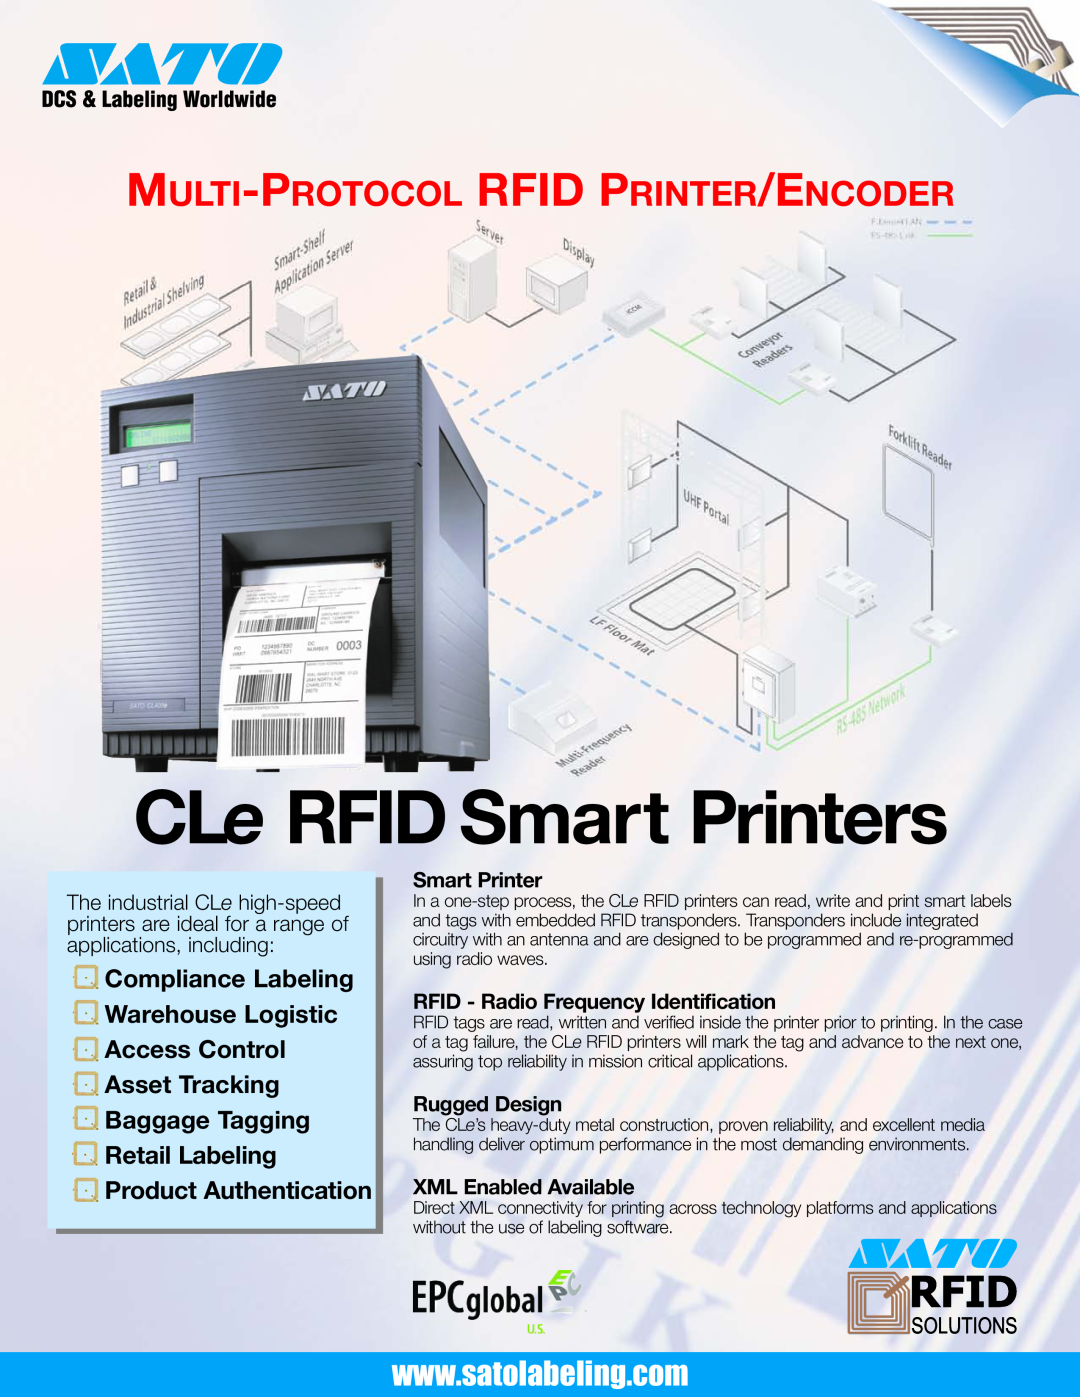 SATO CLe RFID Smart manual Smart Printer, RFID - Radio Frequency Identification, Rugged Design, XML Enabled Available 